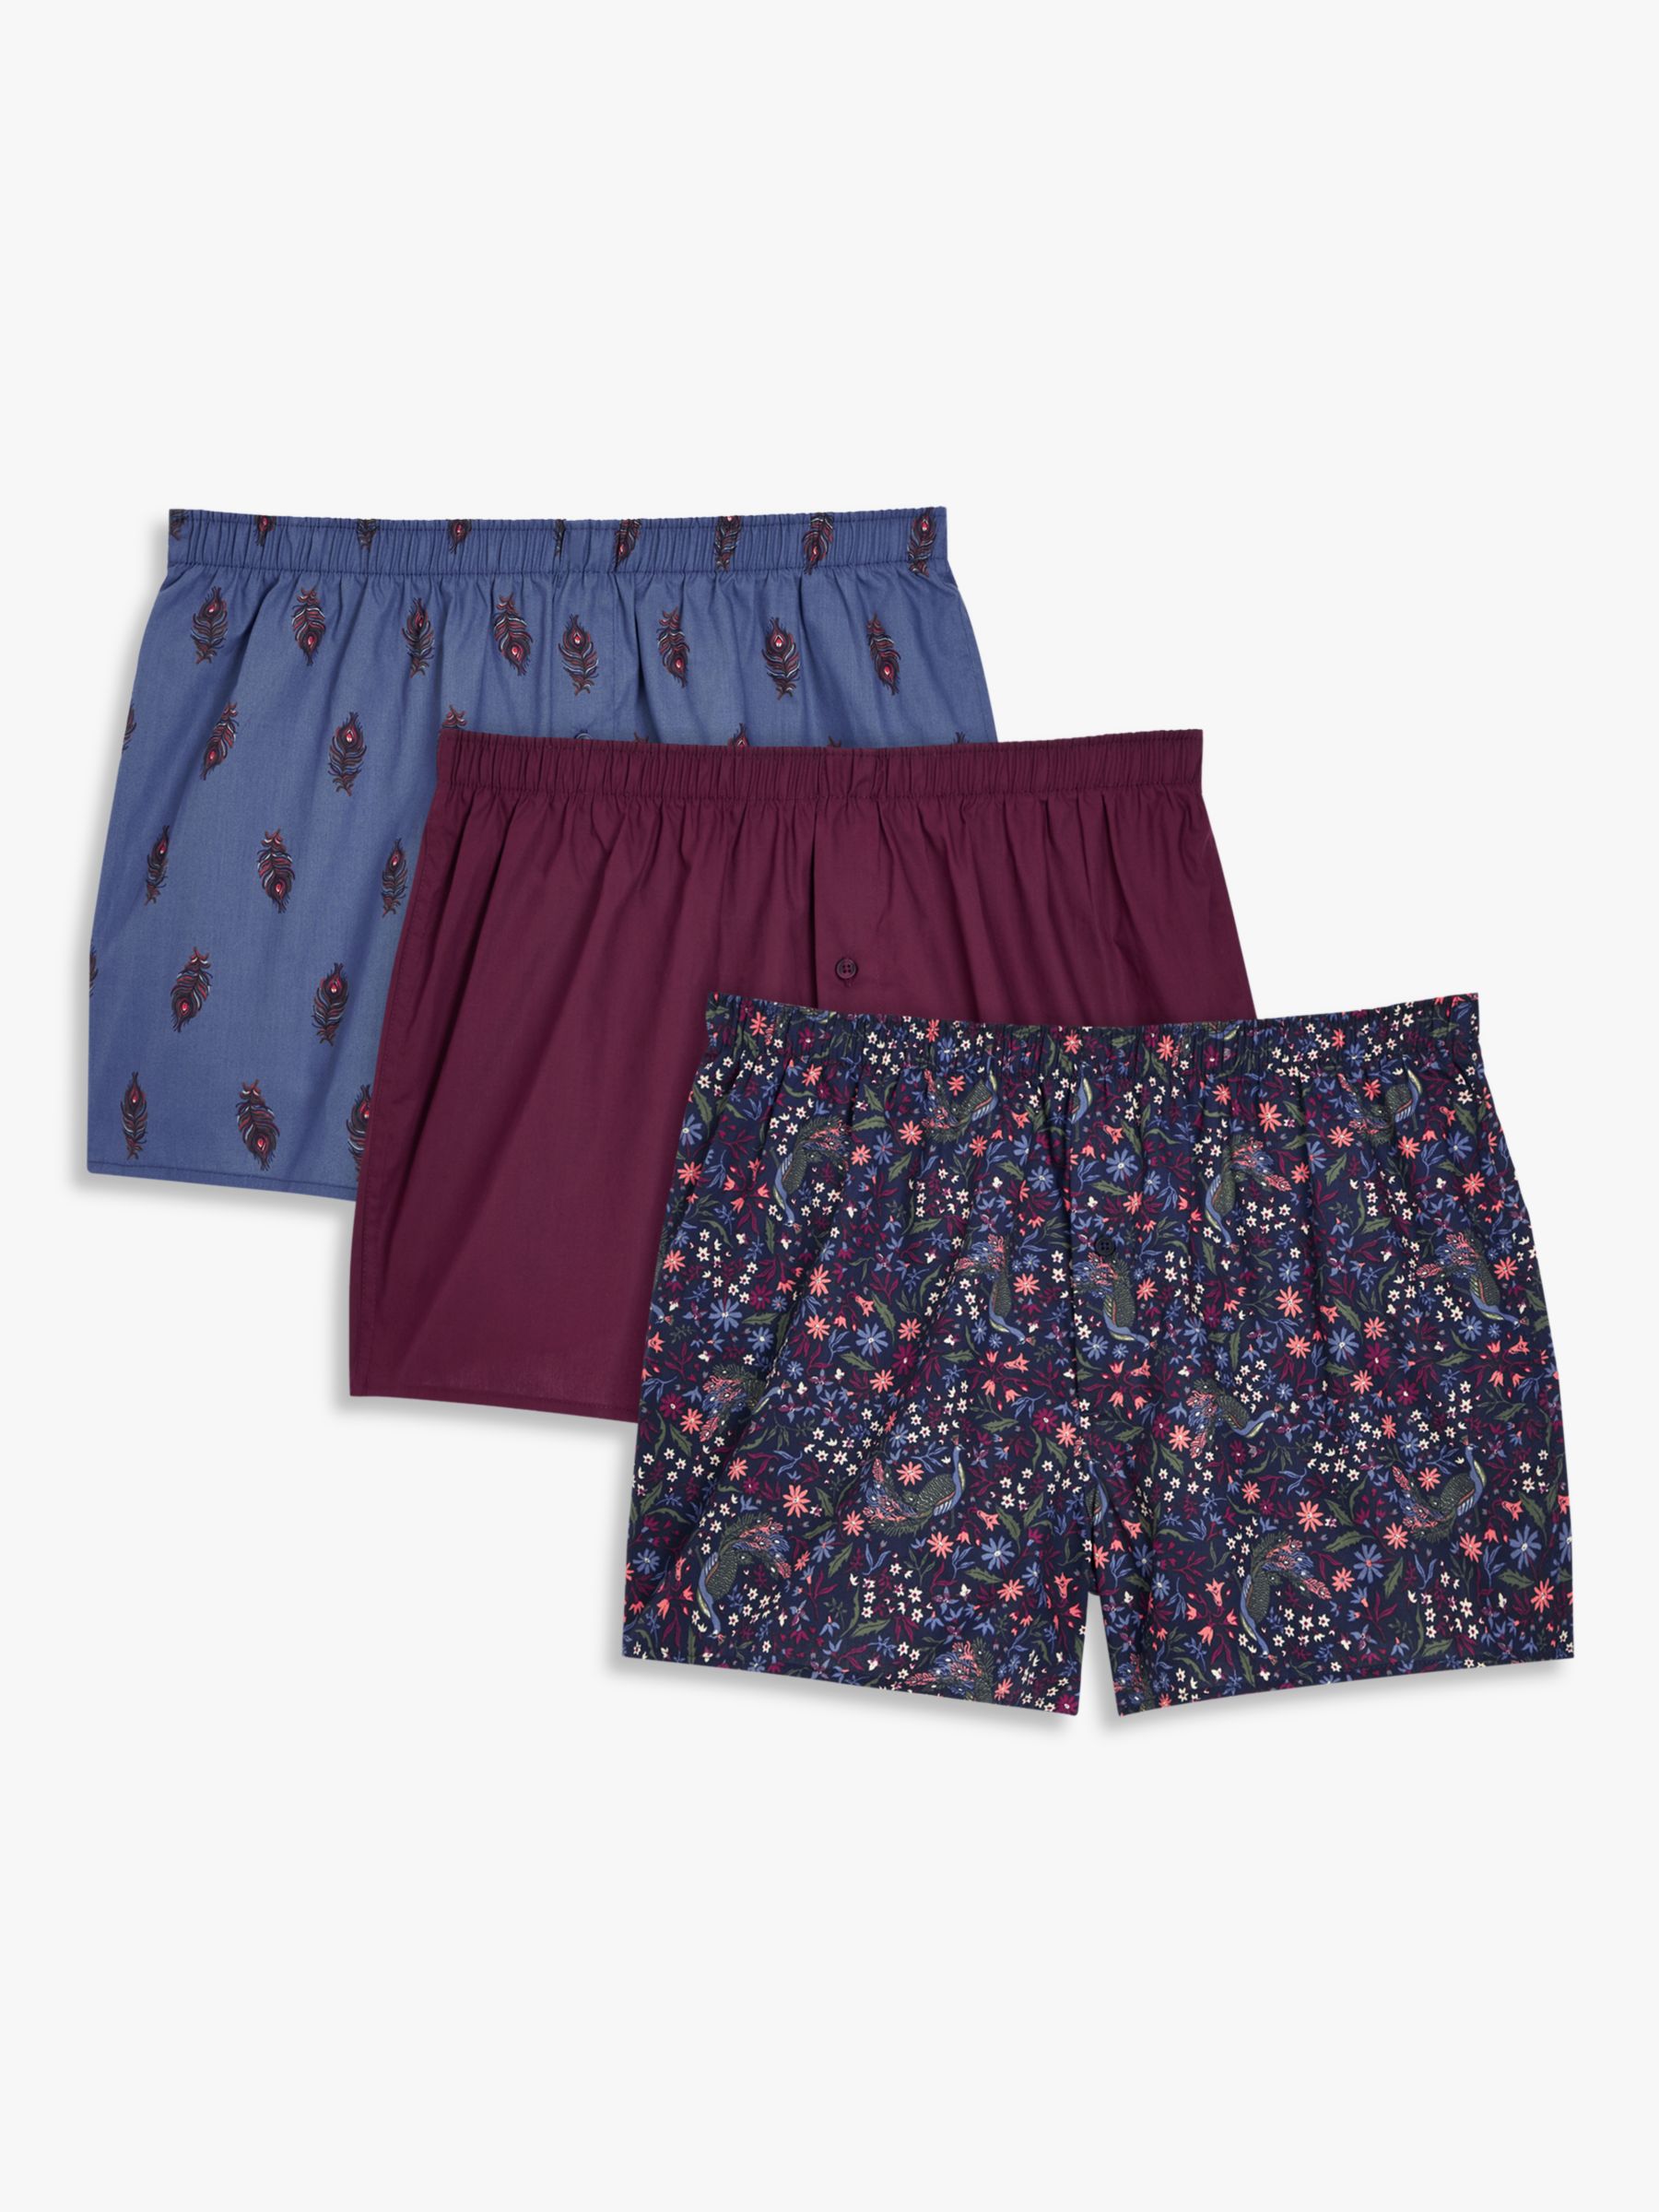 John Lewis Organic Cotton Feather Paisley Print Boxers, Pack of 3, Blue ...